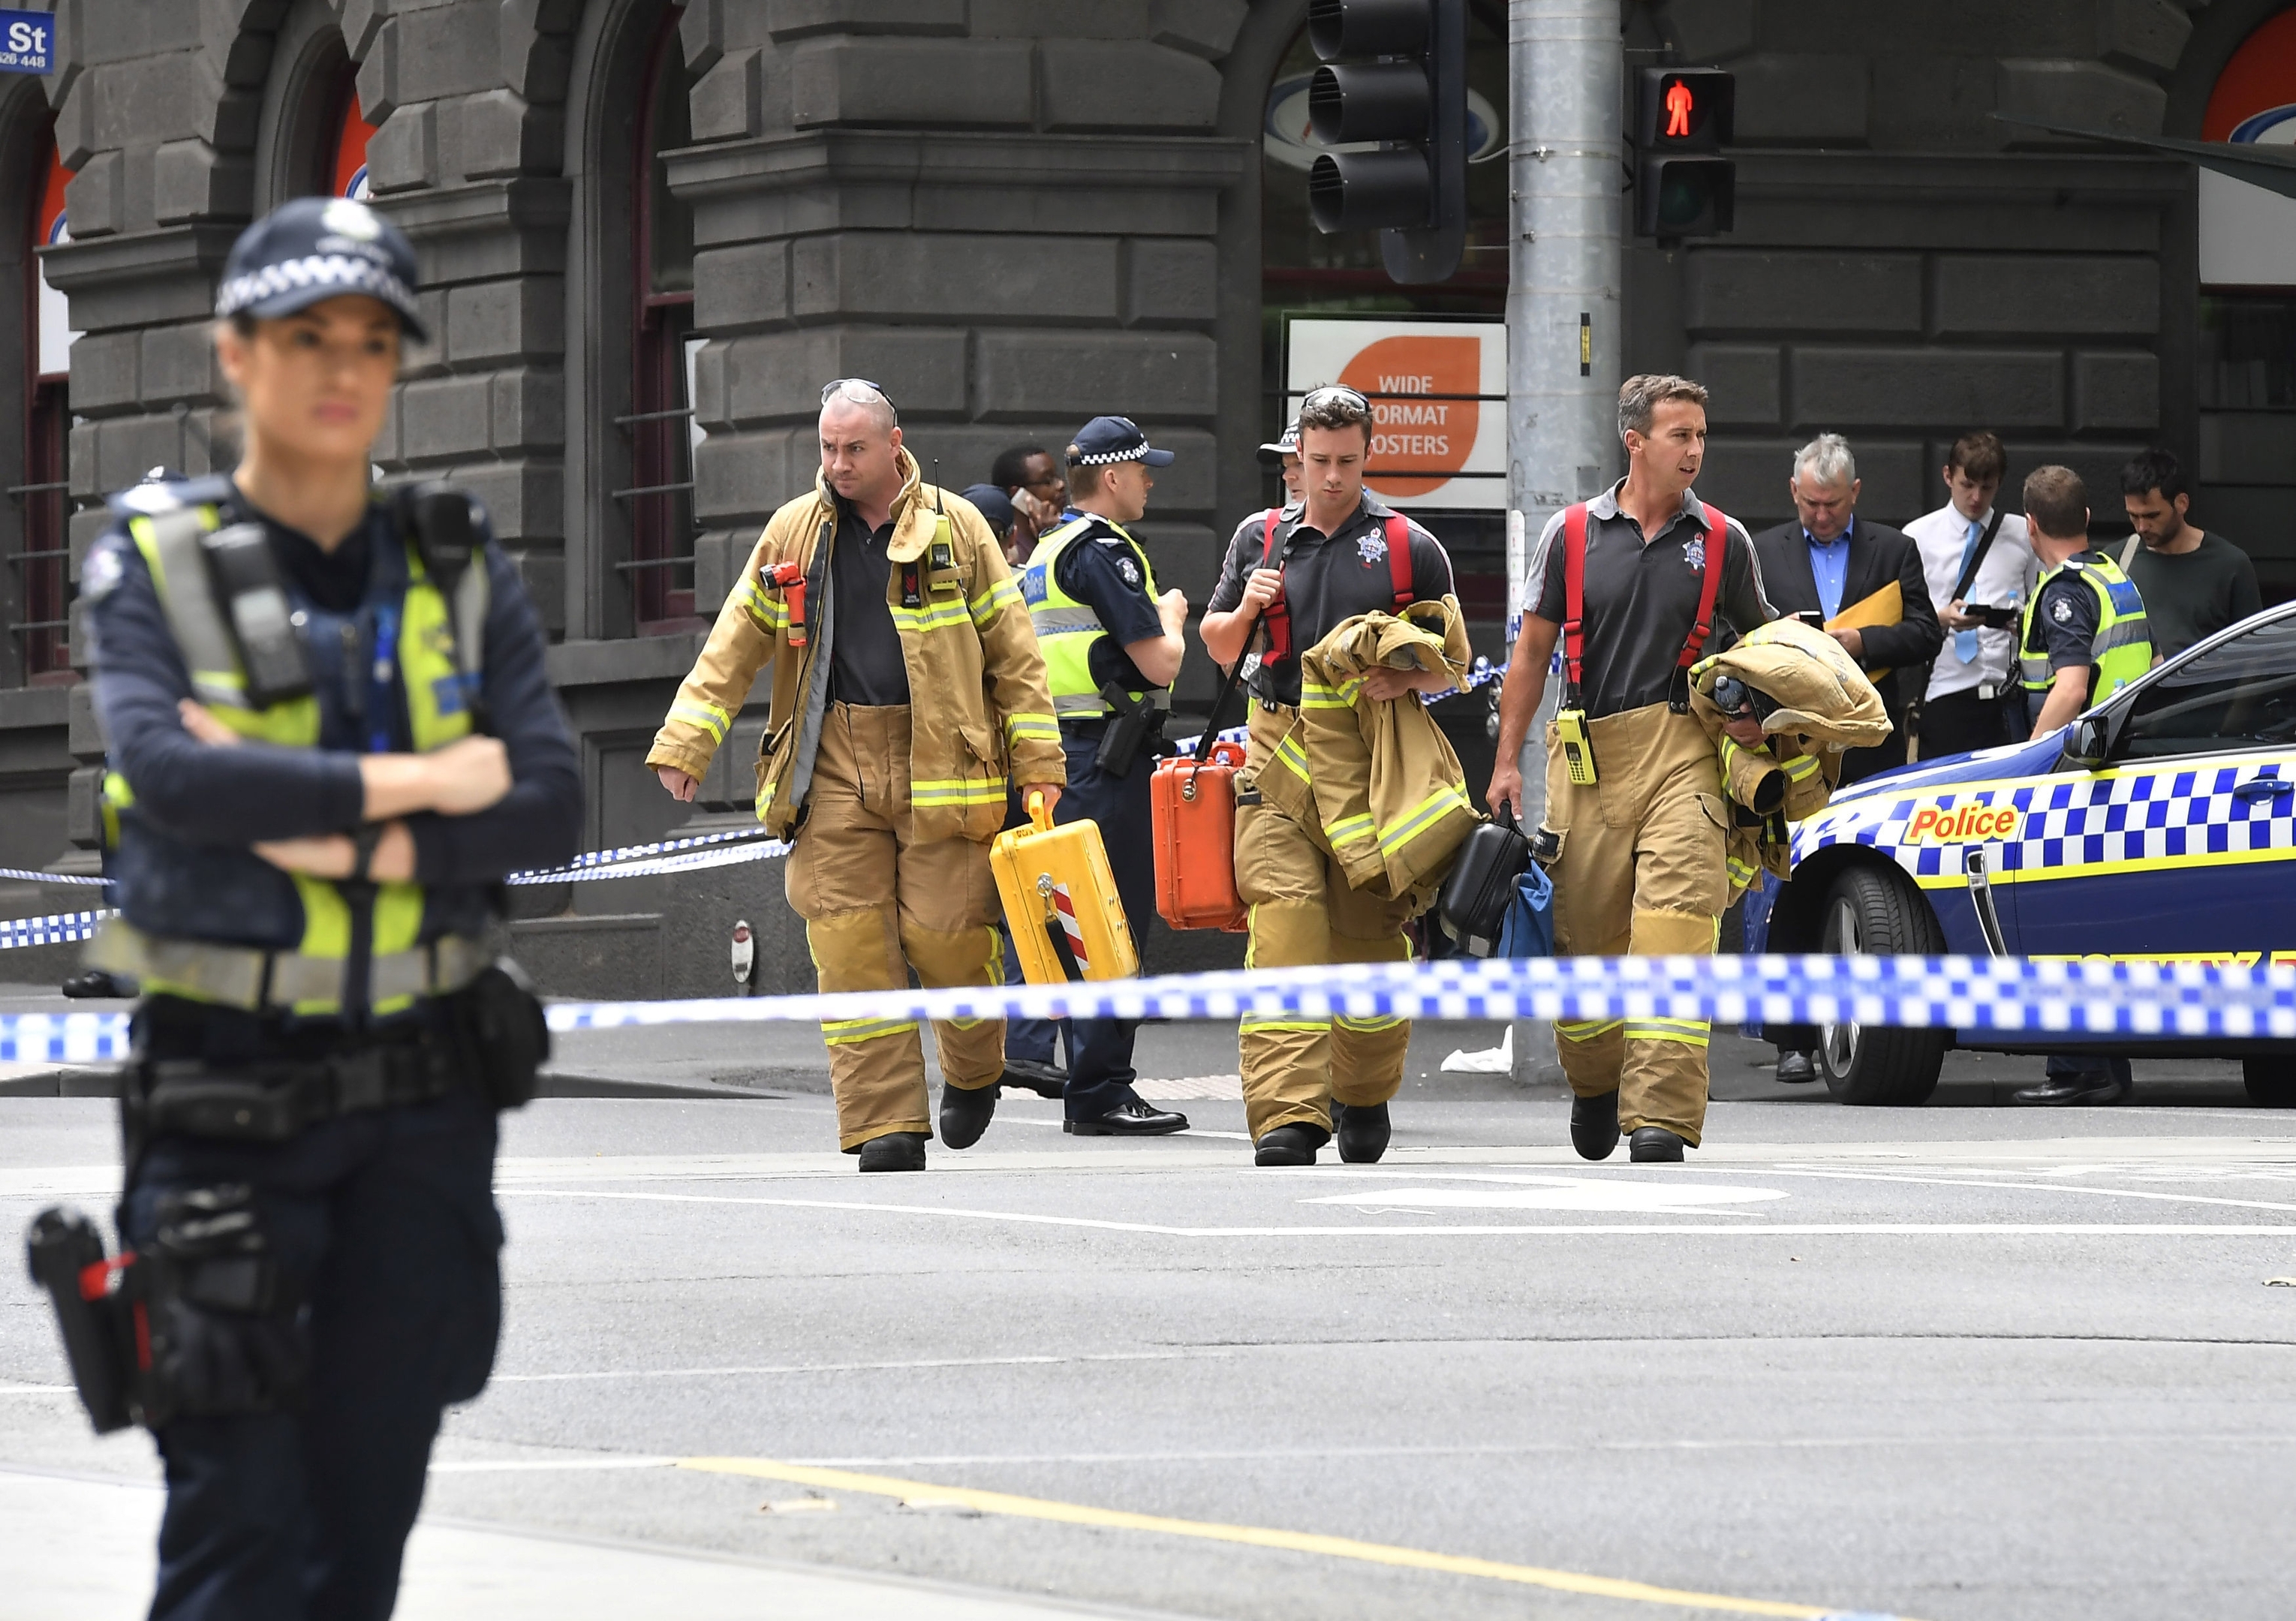 Rescue workers cross a major intersection after a car struck pedestrians in the central business district of Melbourne, 